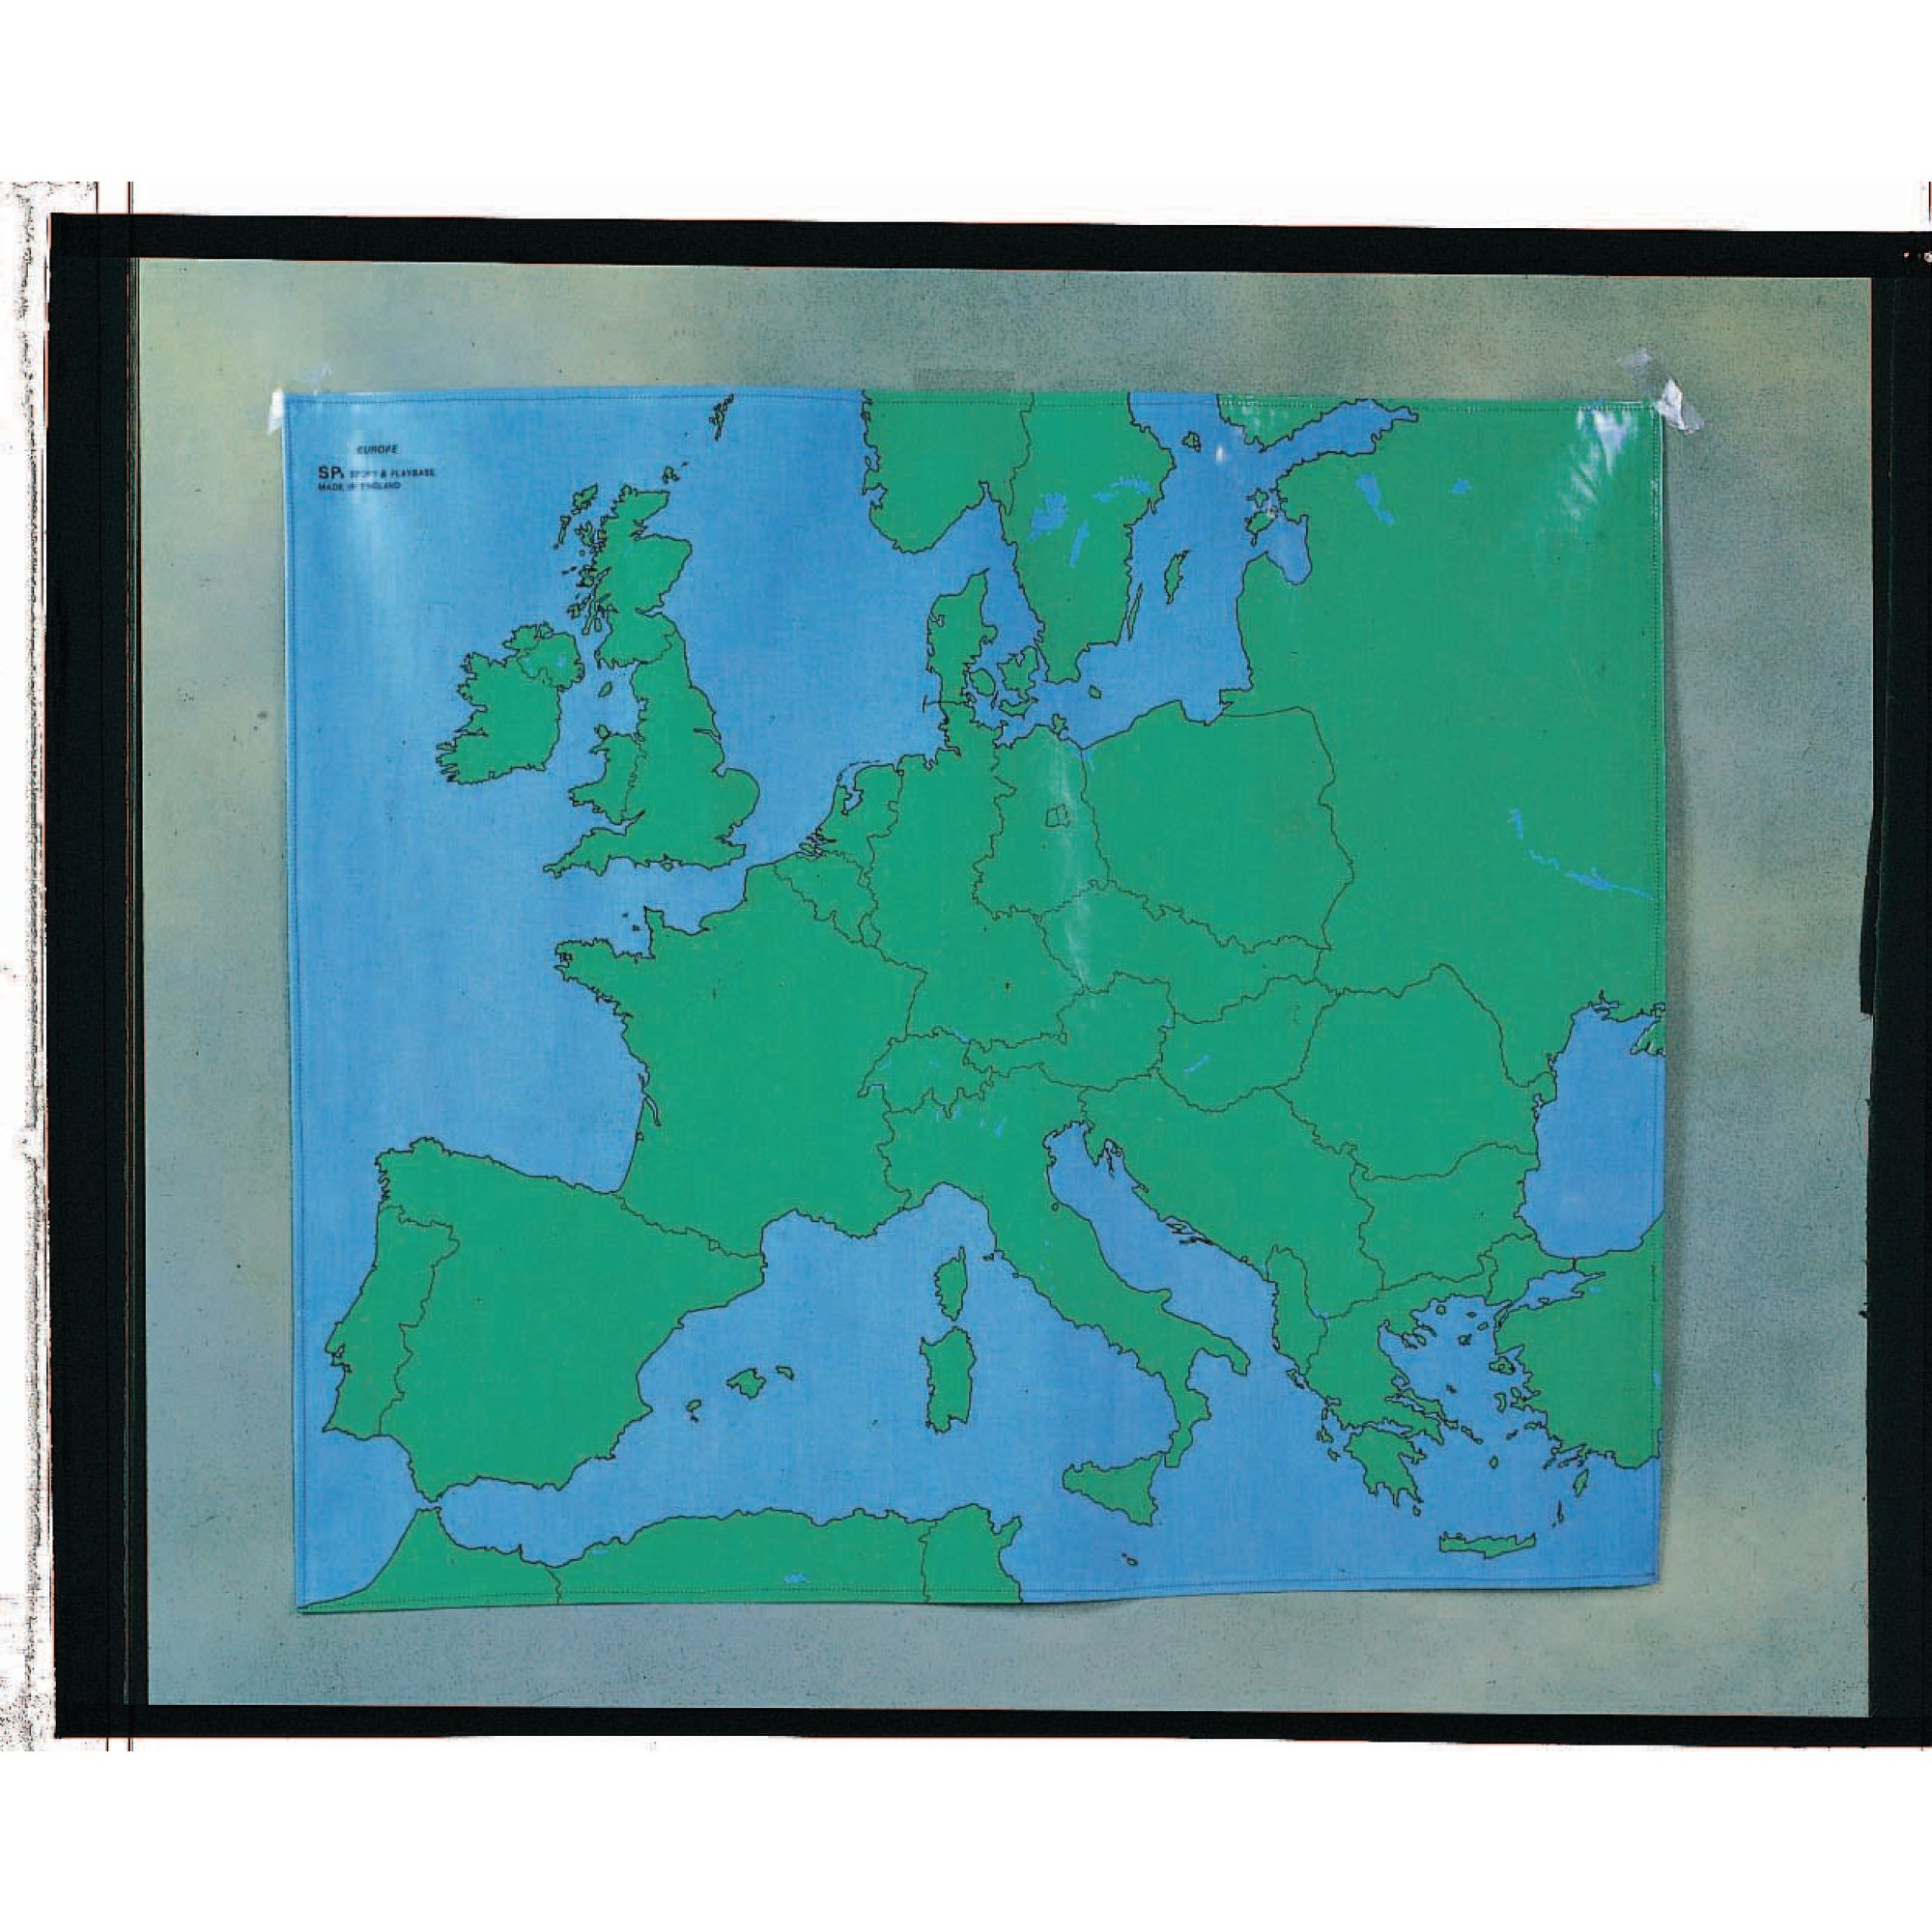 Playcloth Outline Map - Europe